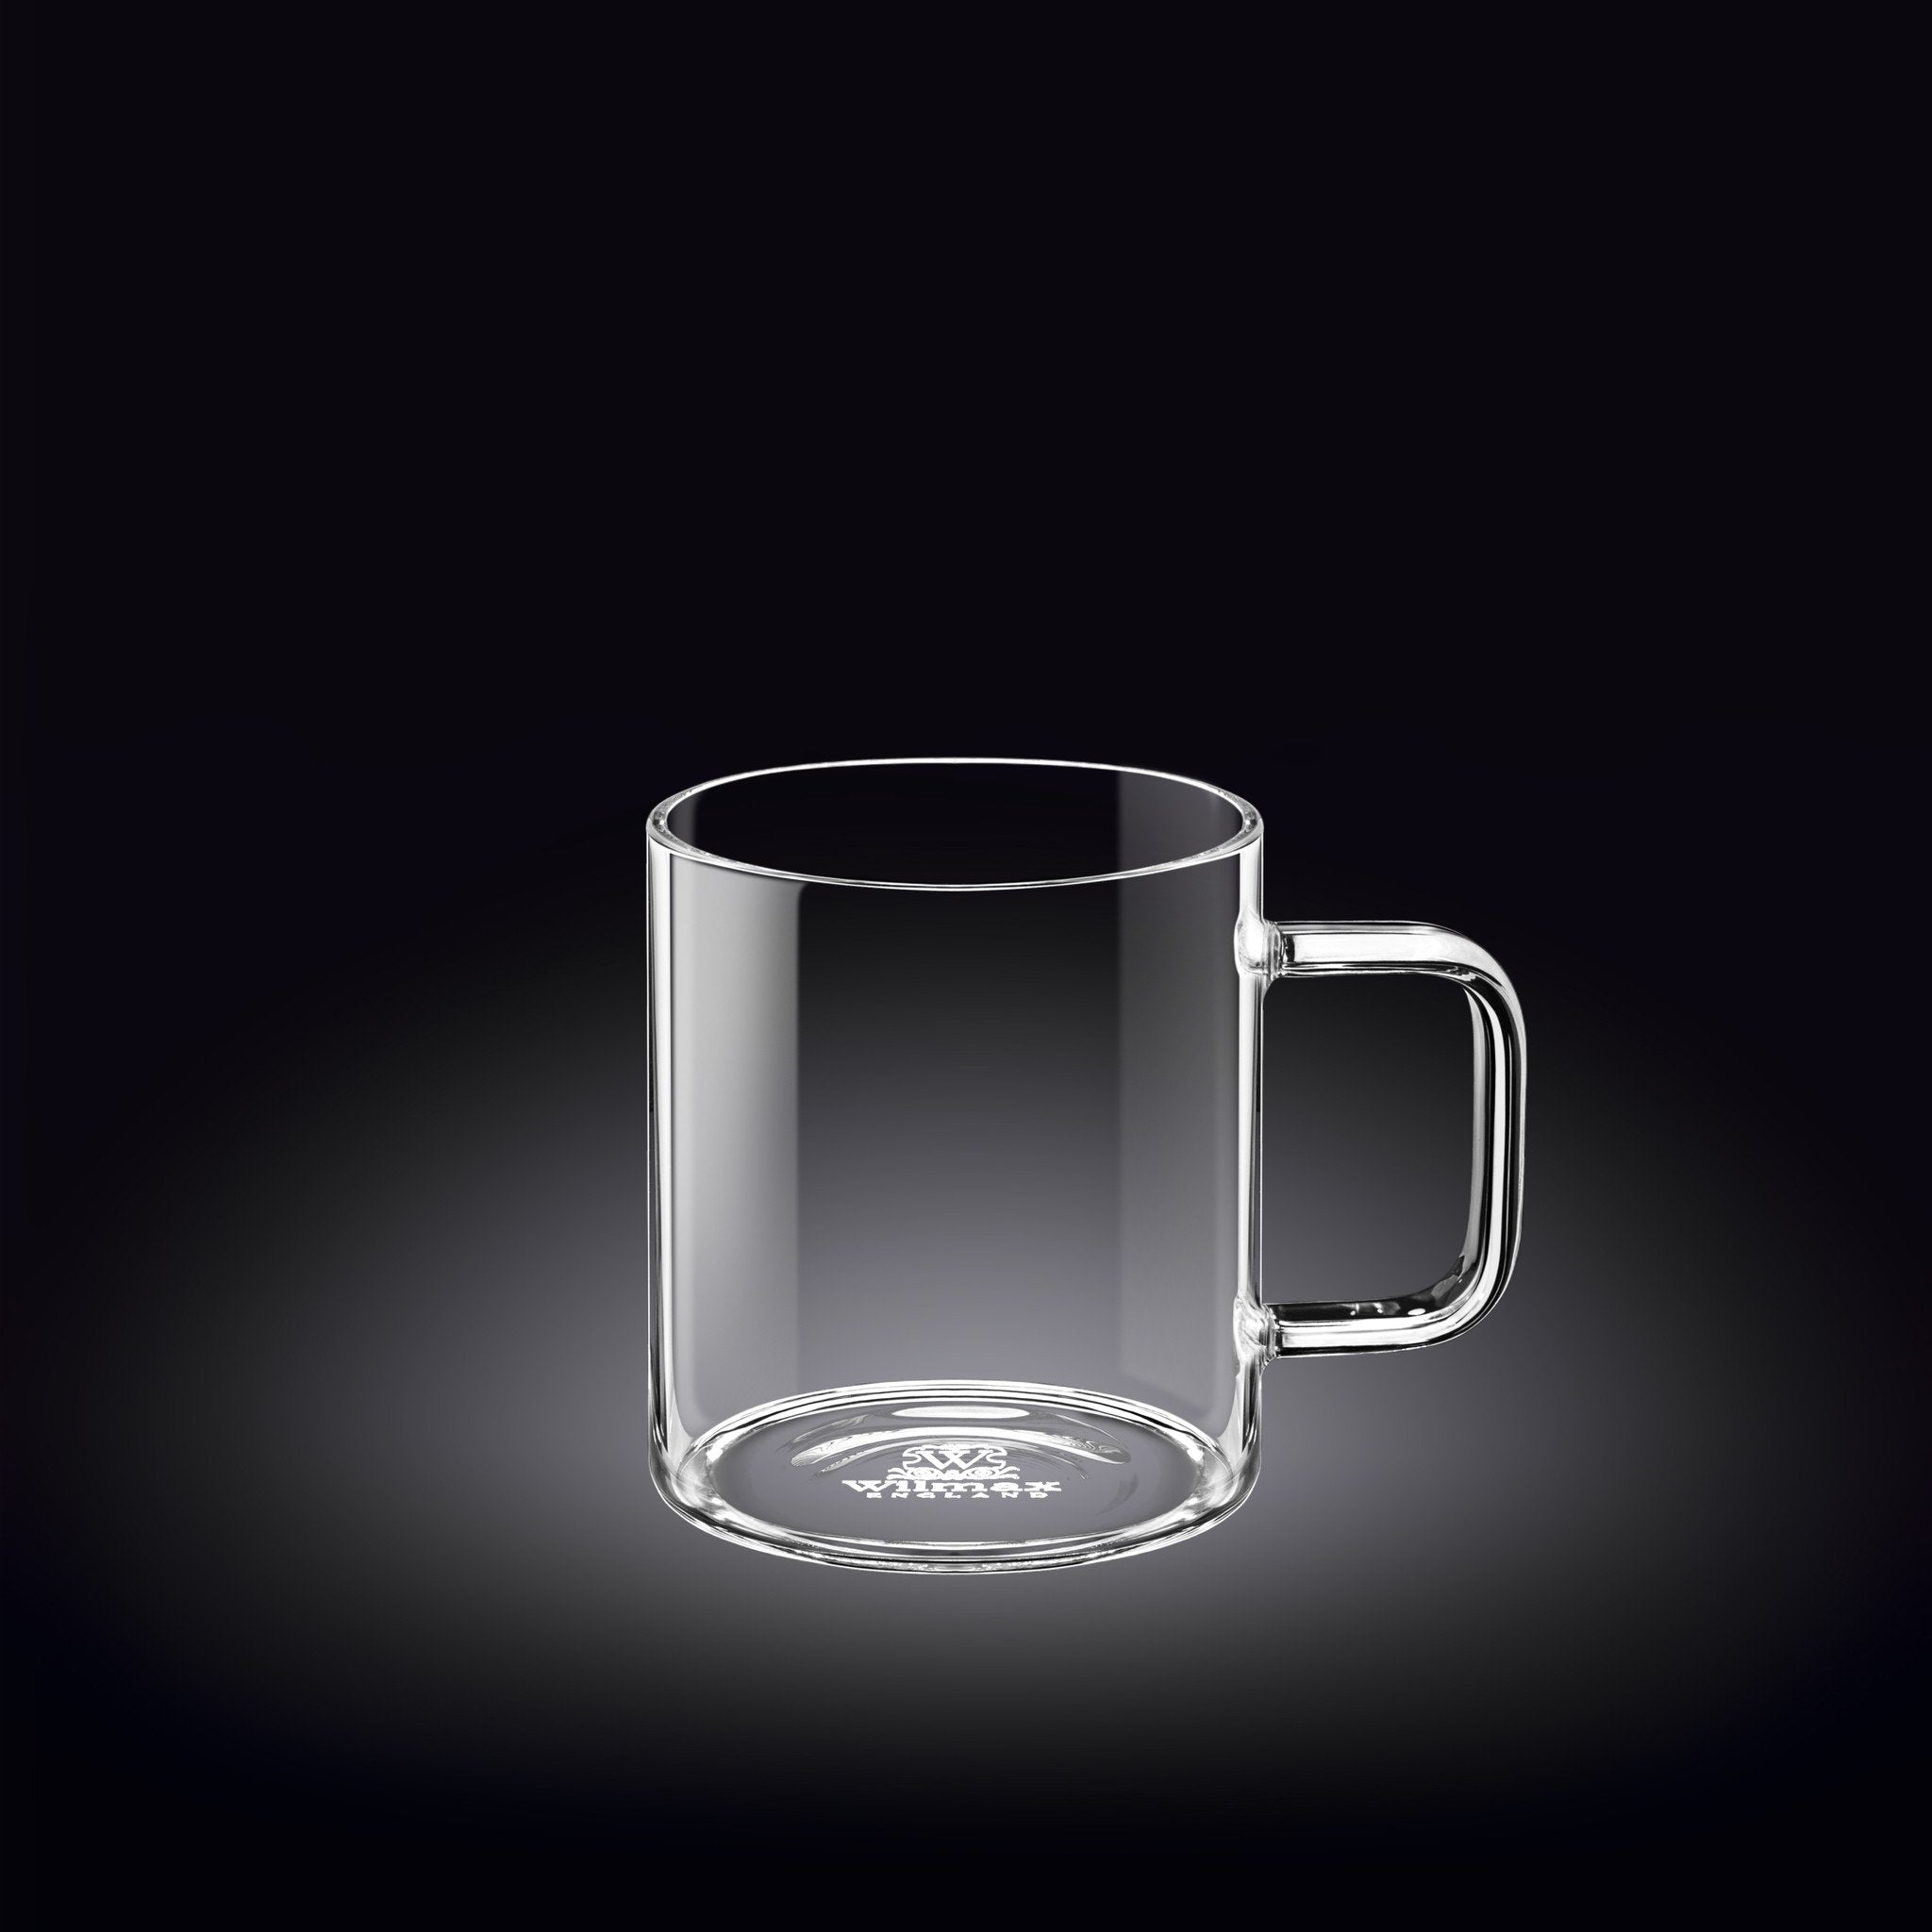 Thermo Cup